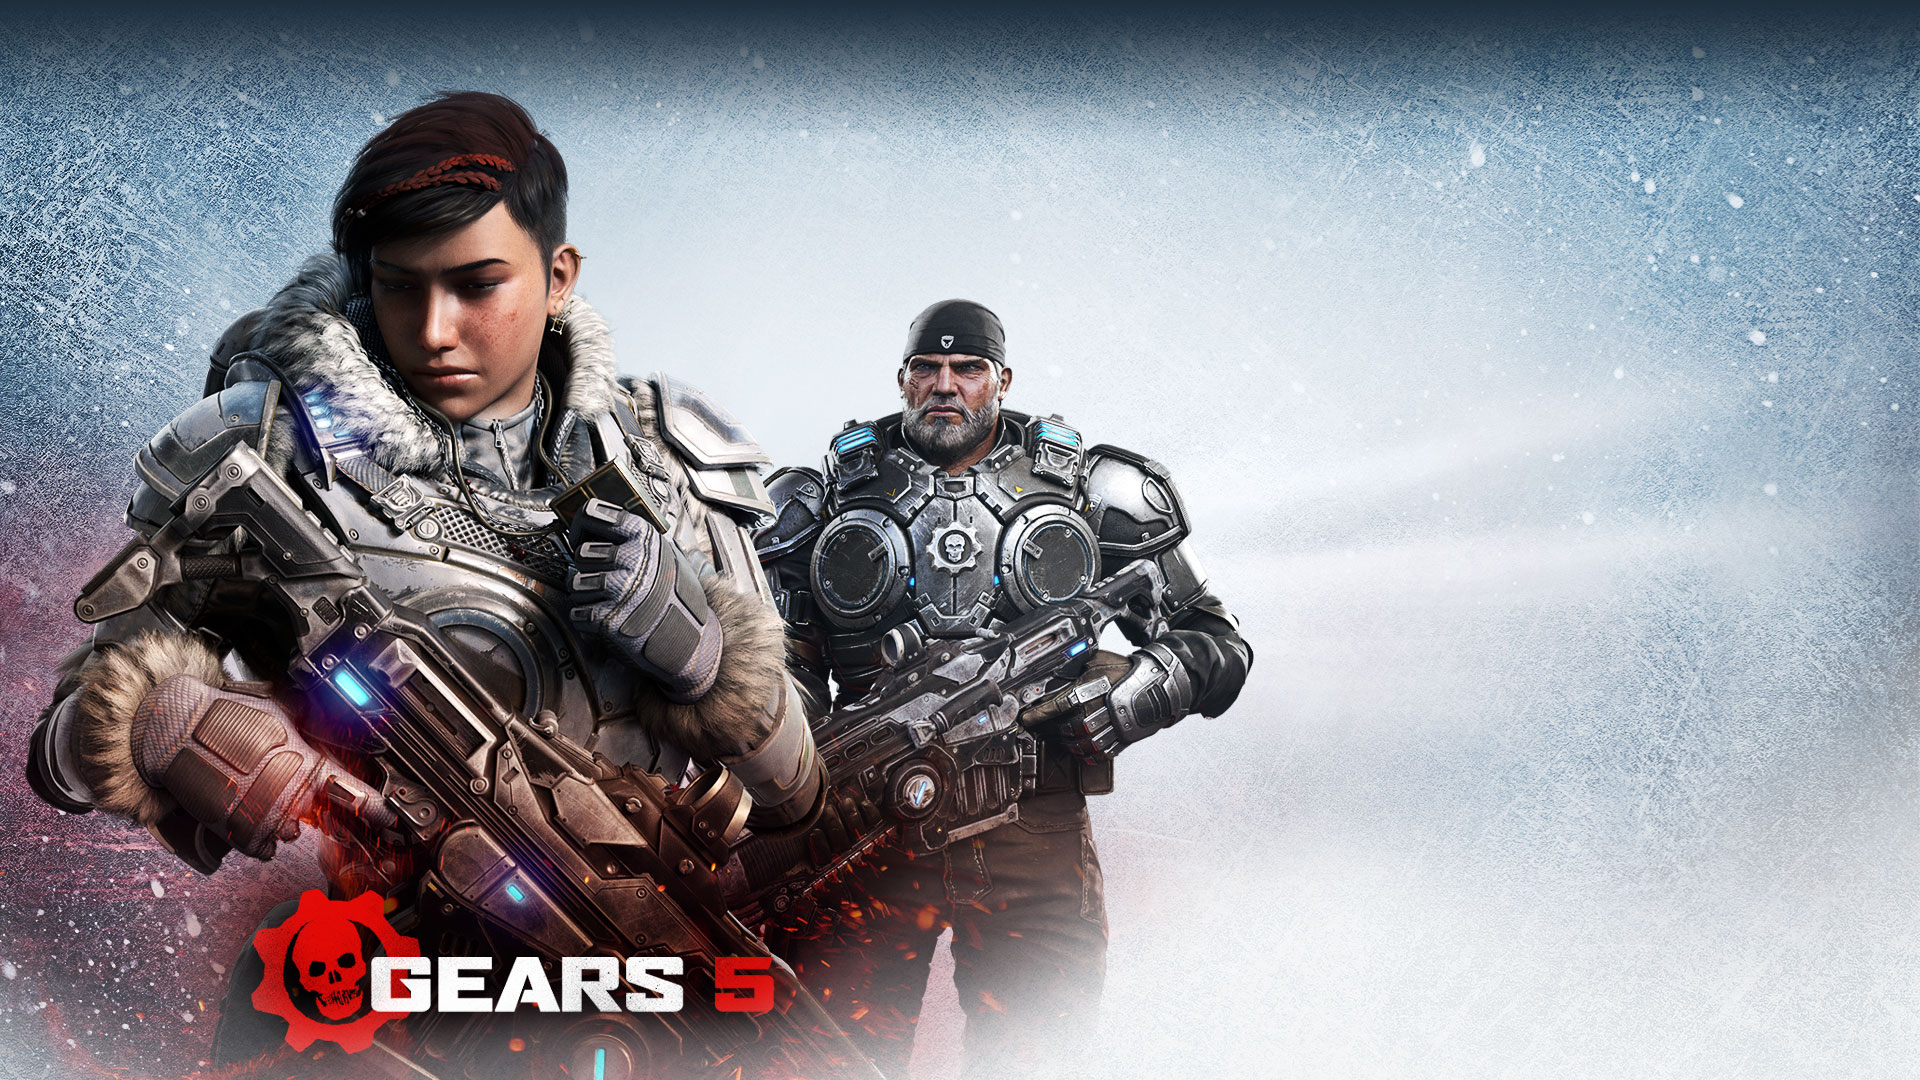 Gears 5, Kait and Marcus